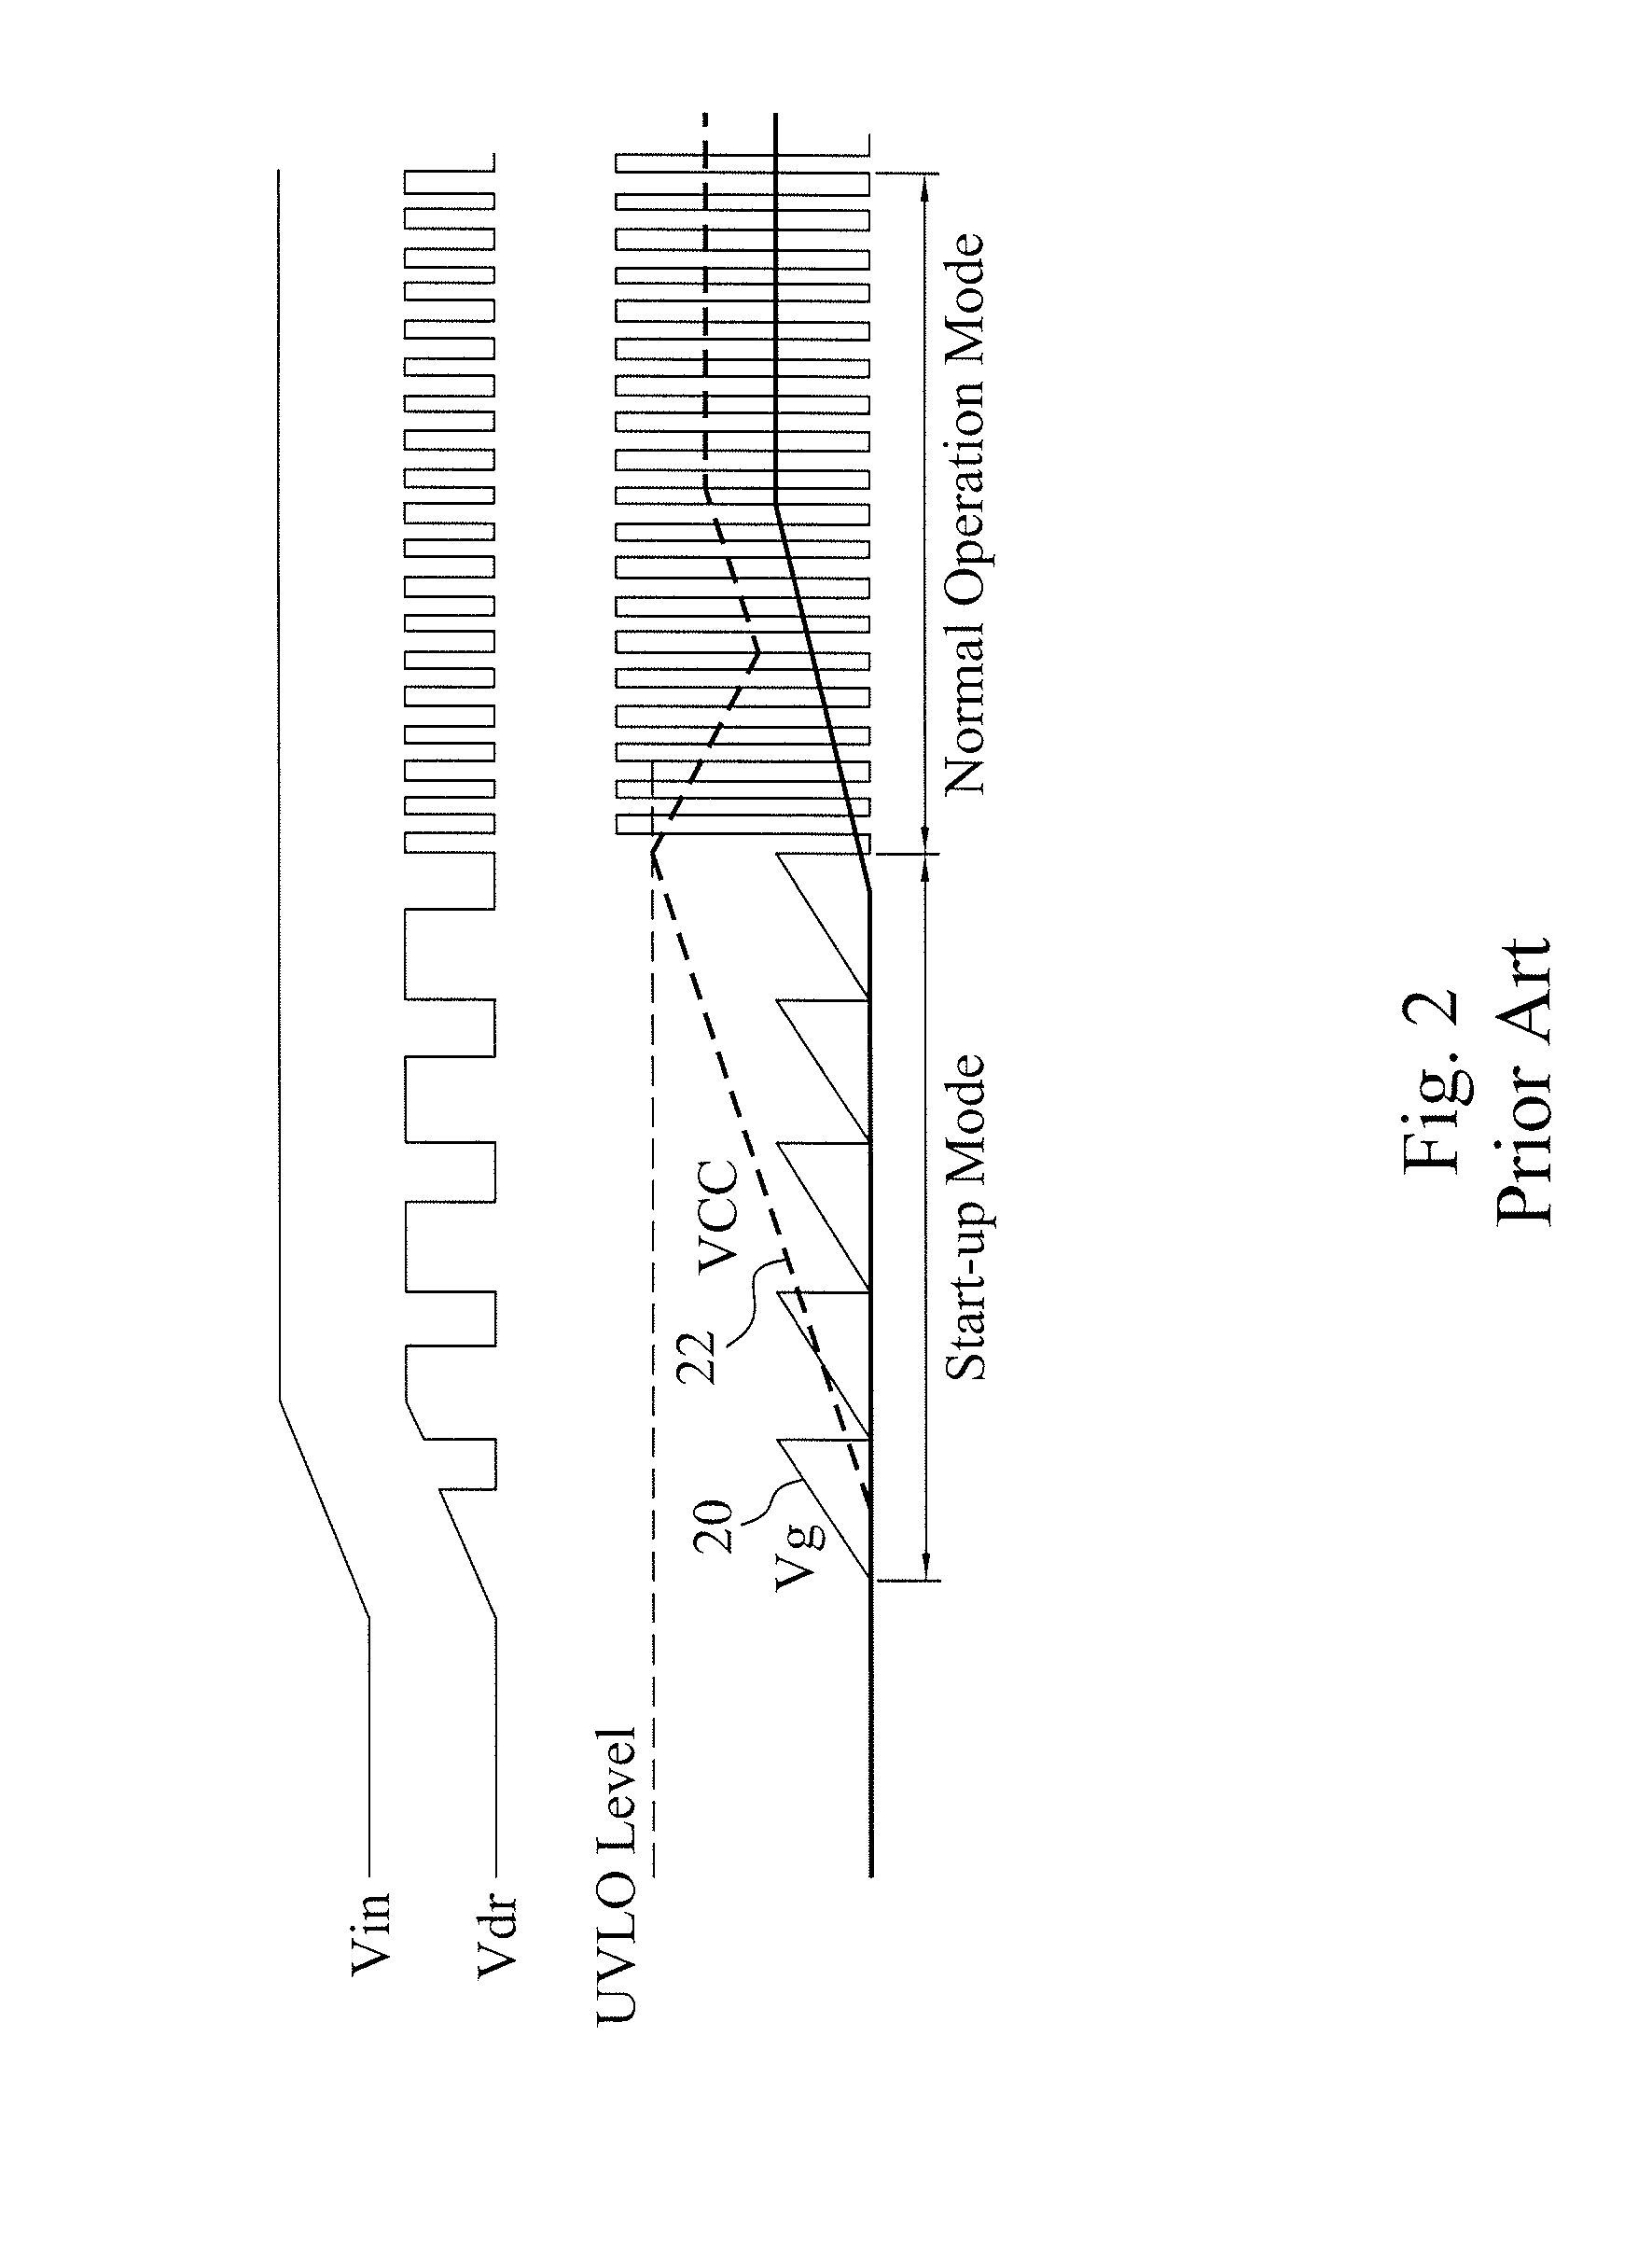 Fast start-up circuit of a flyback power supply and method thereof